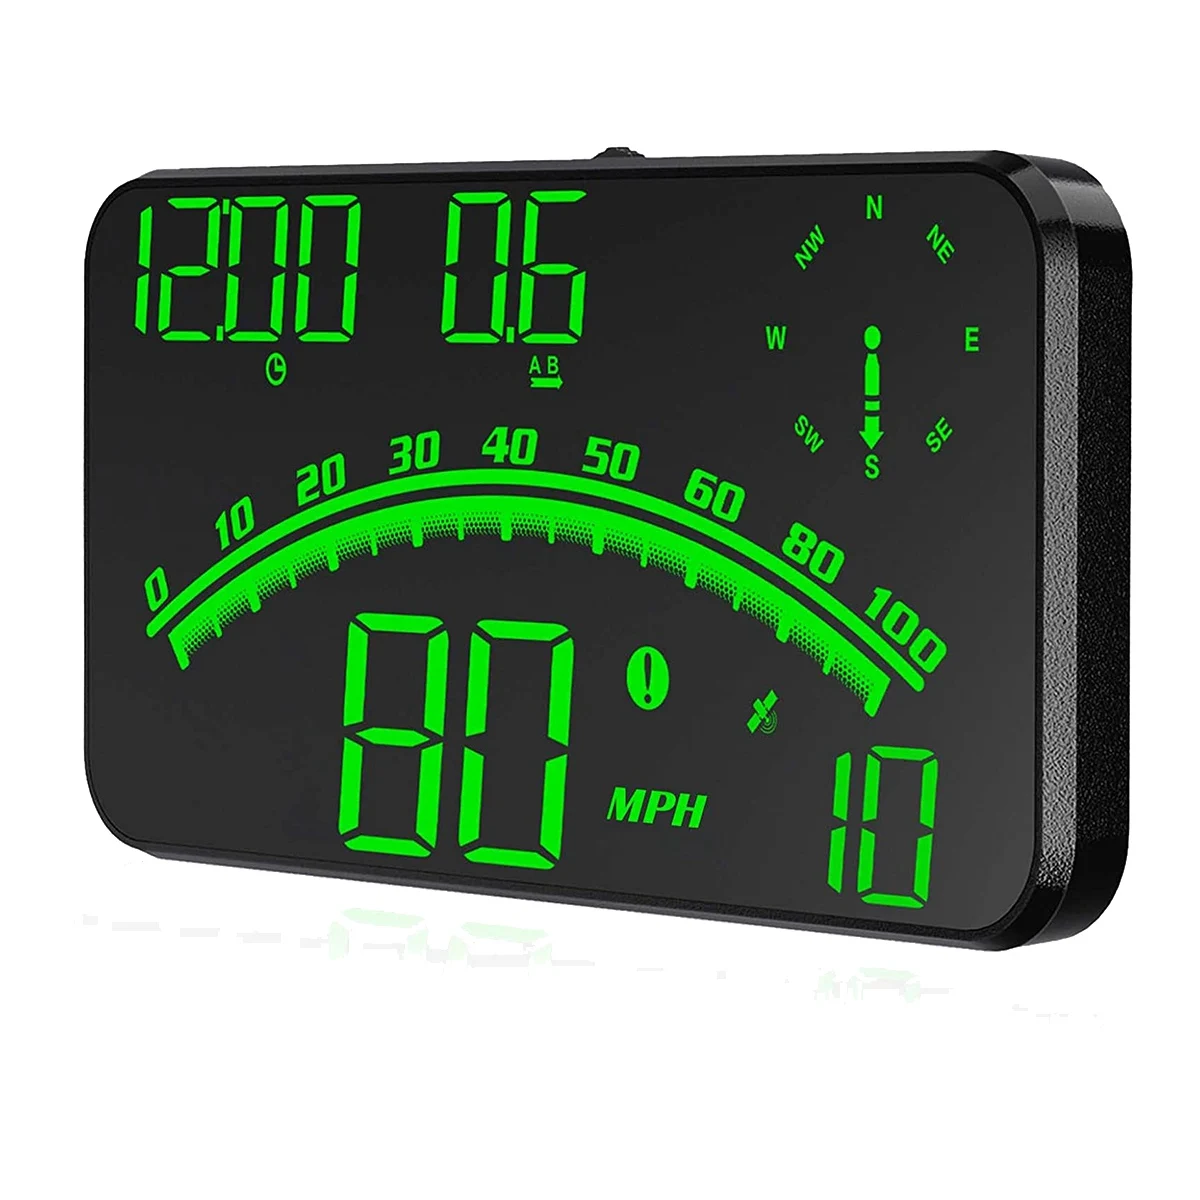 

Car Digital GPS Speedometer,Car HUD Head Up Display with Speed MPH, Compass Direction, Fatigue Driving Reminder